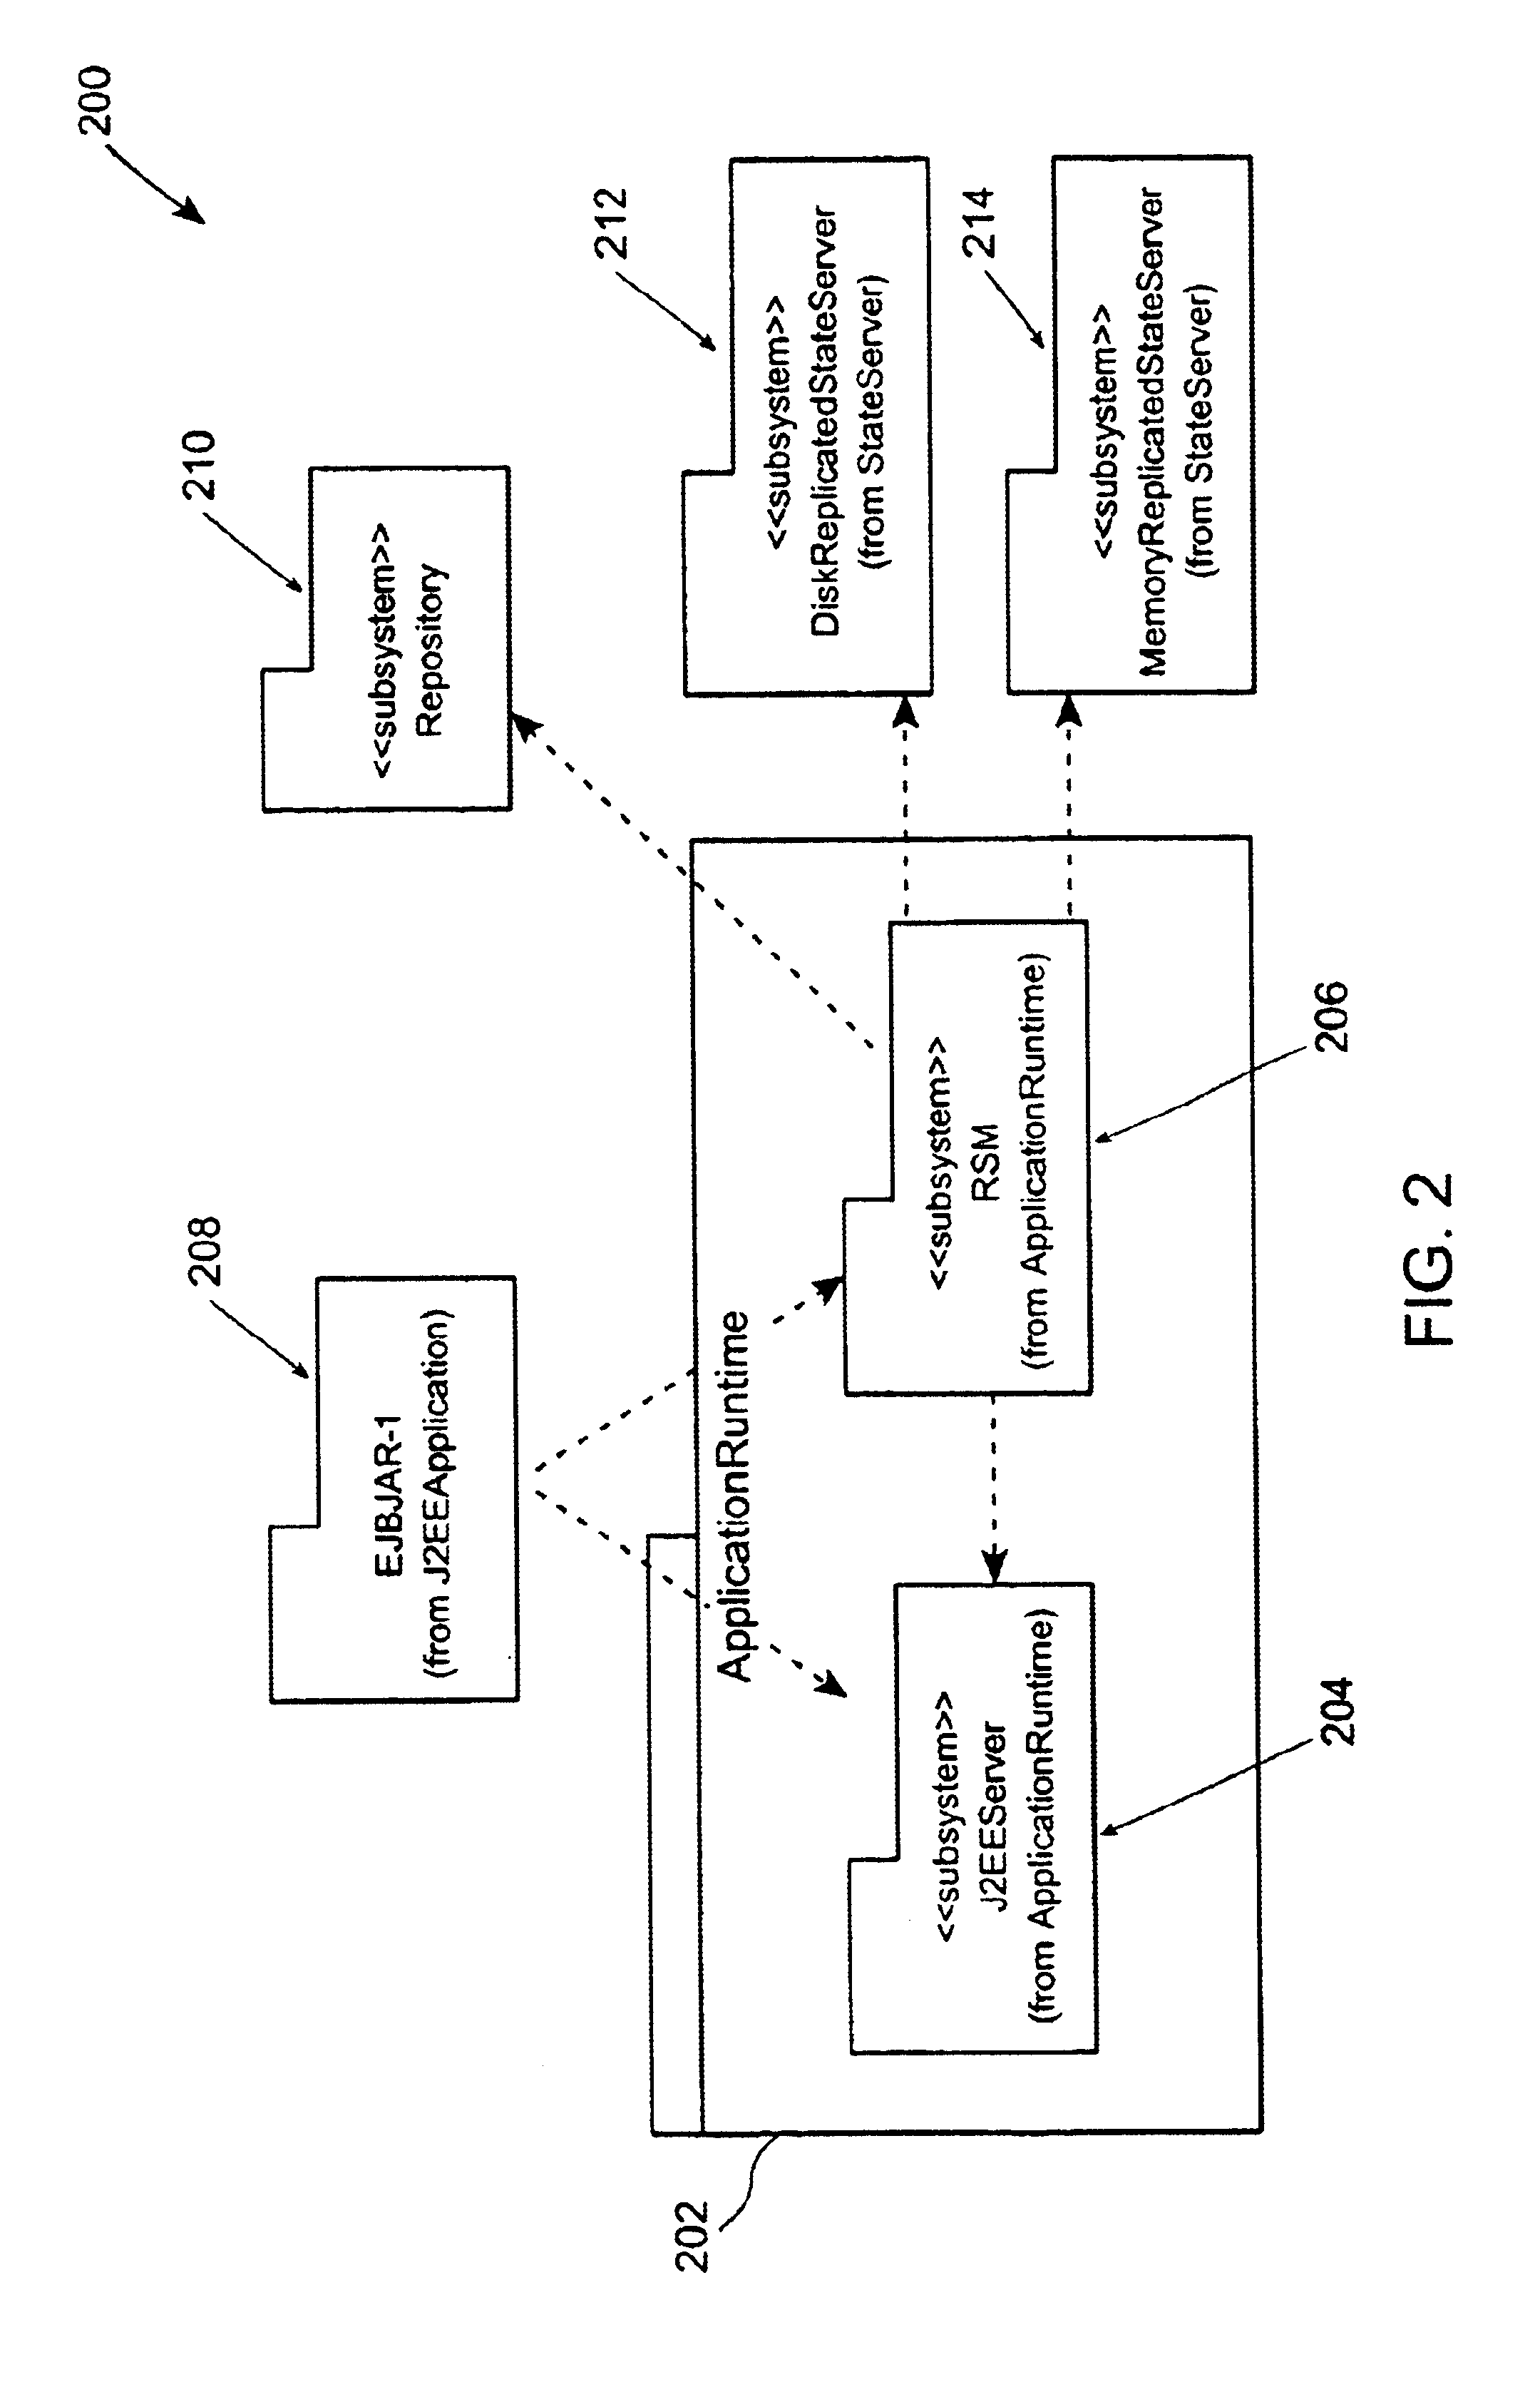 Method and apparatus for managing replicated and migration capable session state for a Java platform